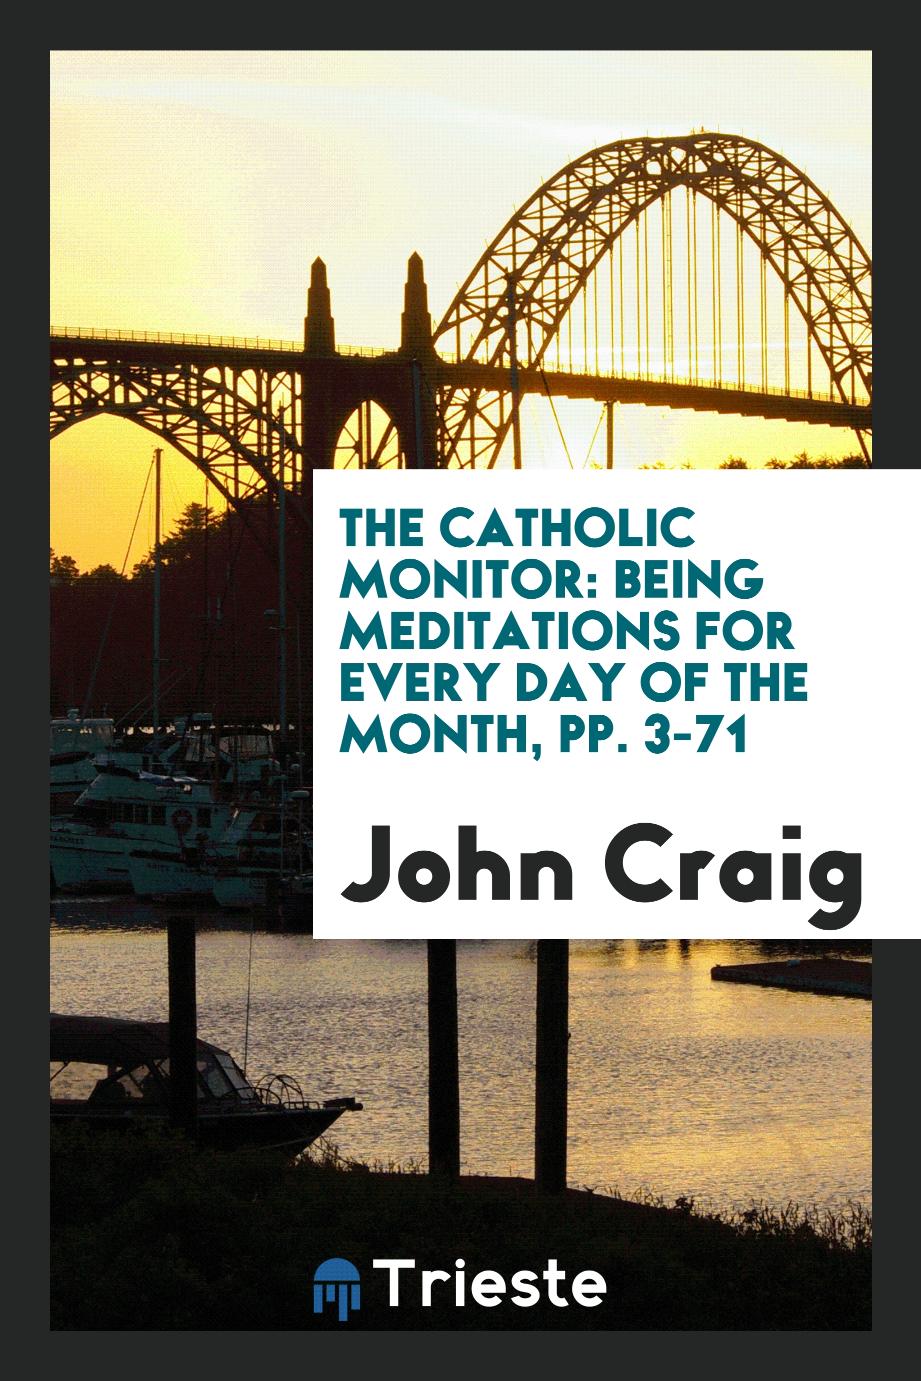 The Catholic monitor: being meditations for every day of the month, pp. 3-71